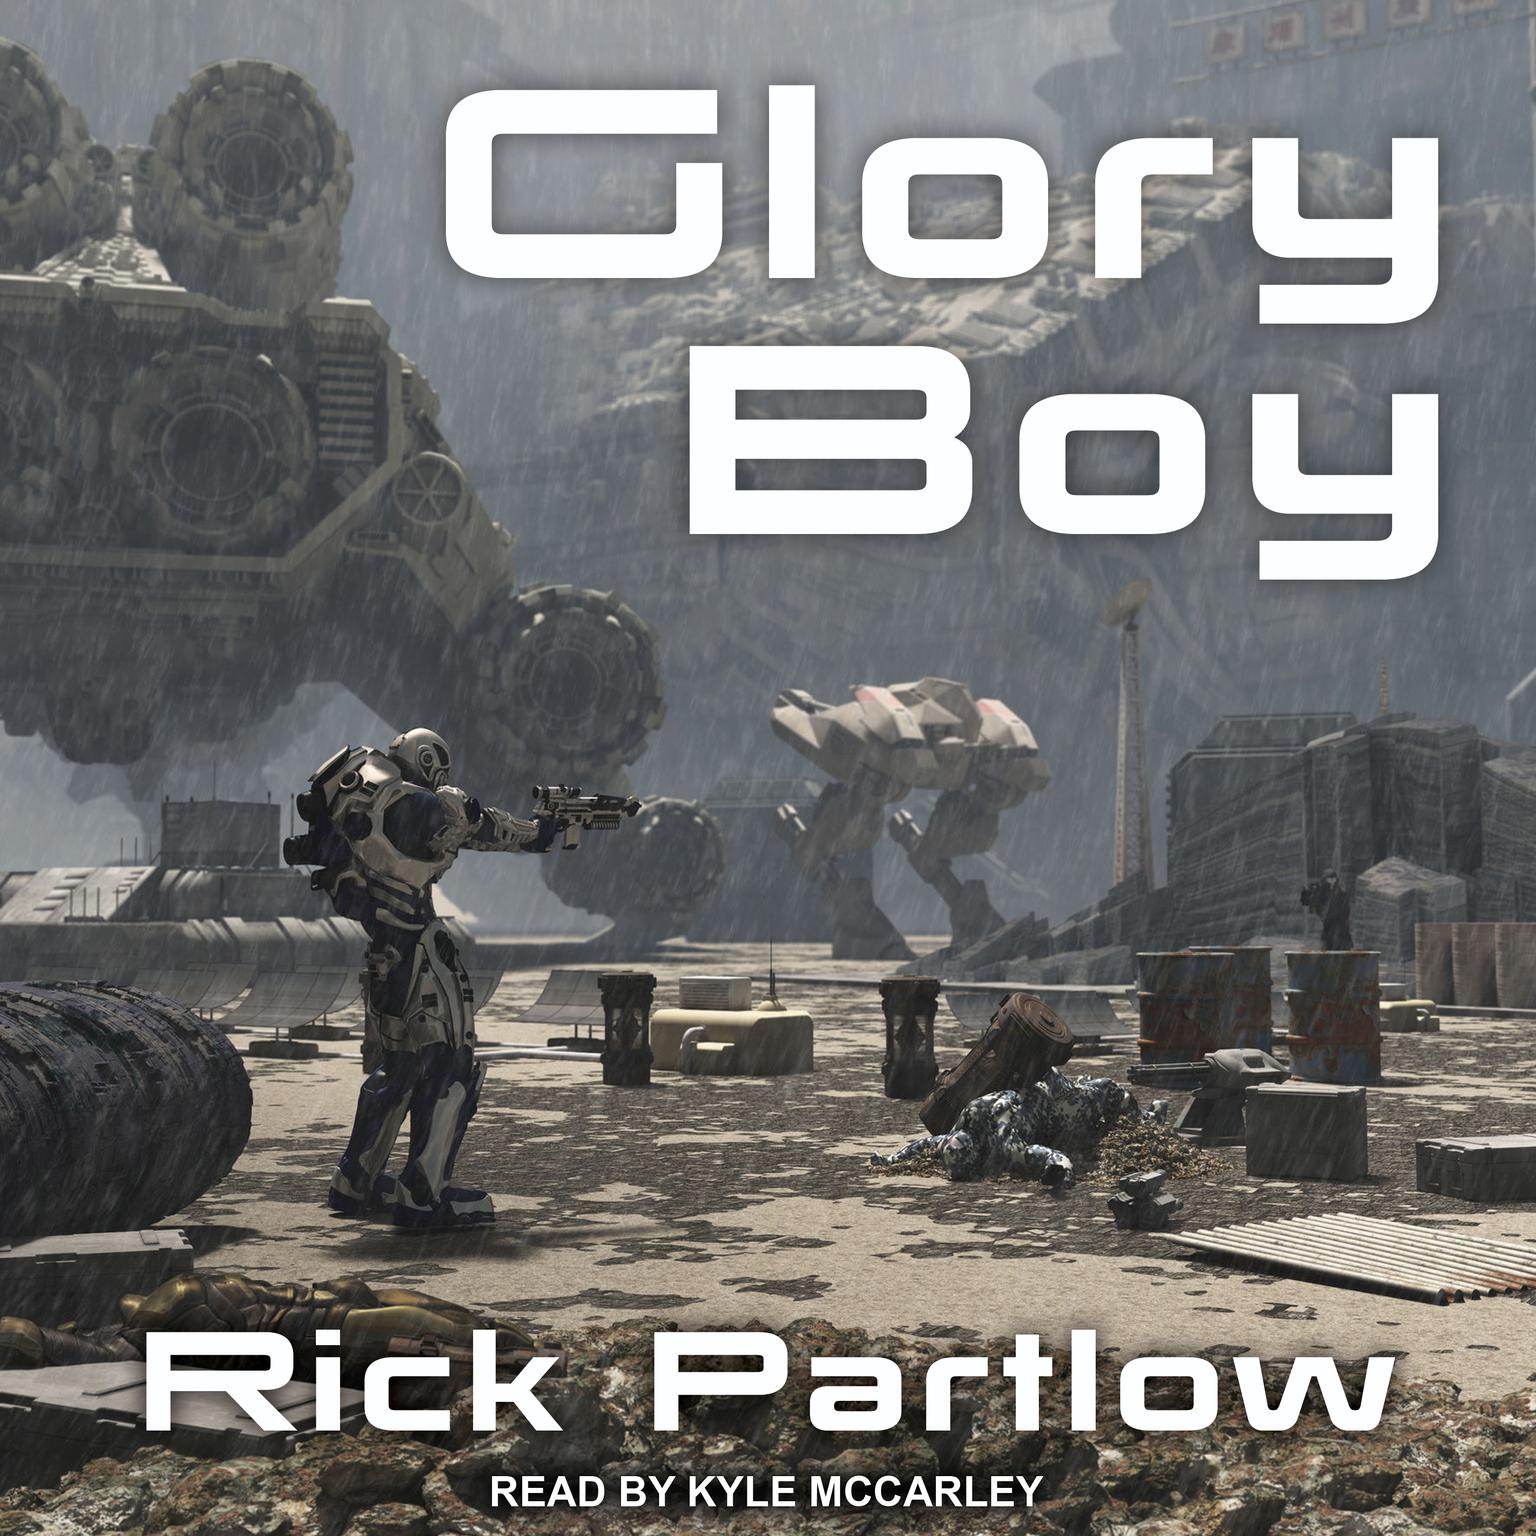 Glory Boy Audiobook, by Rick Partlow